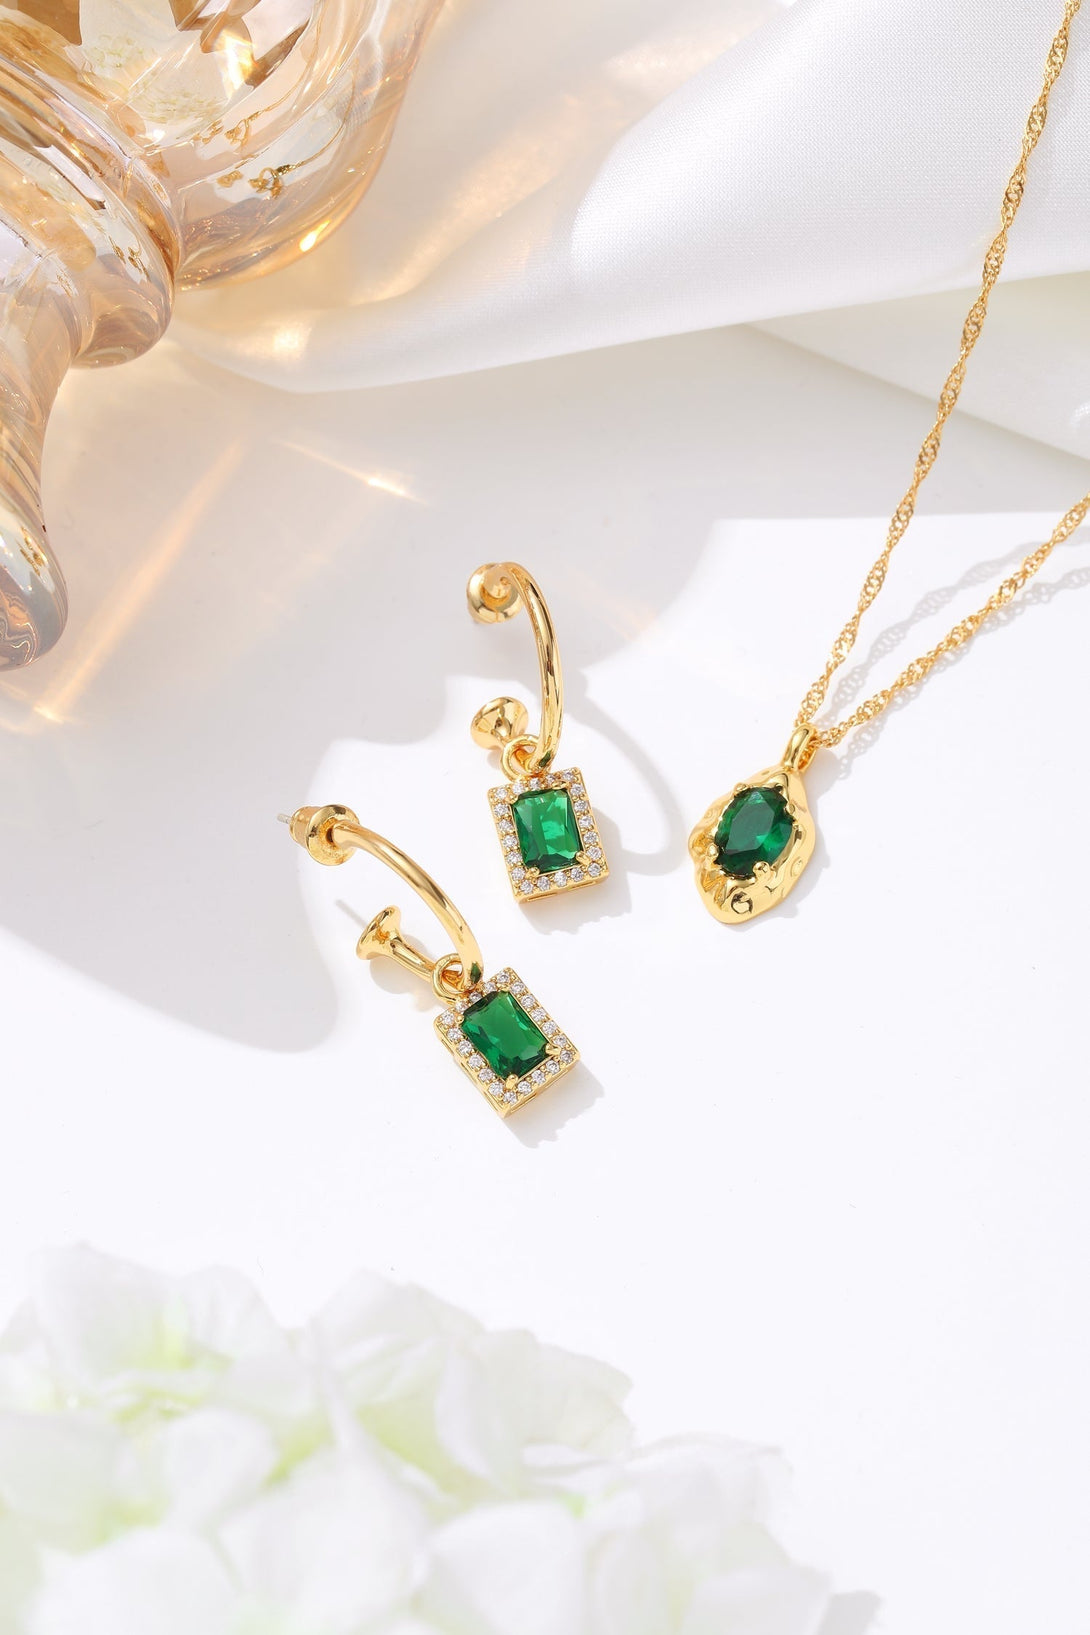 Emerald Pendant Necklace and Earrings Set - Classicharms